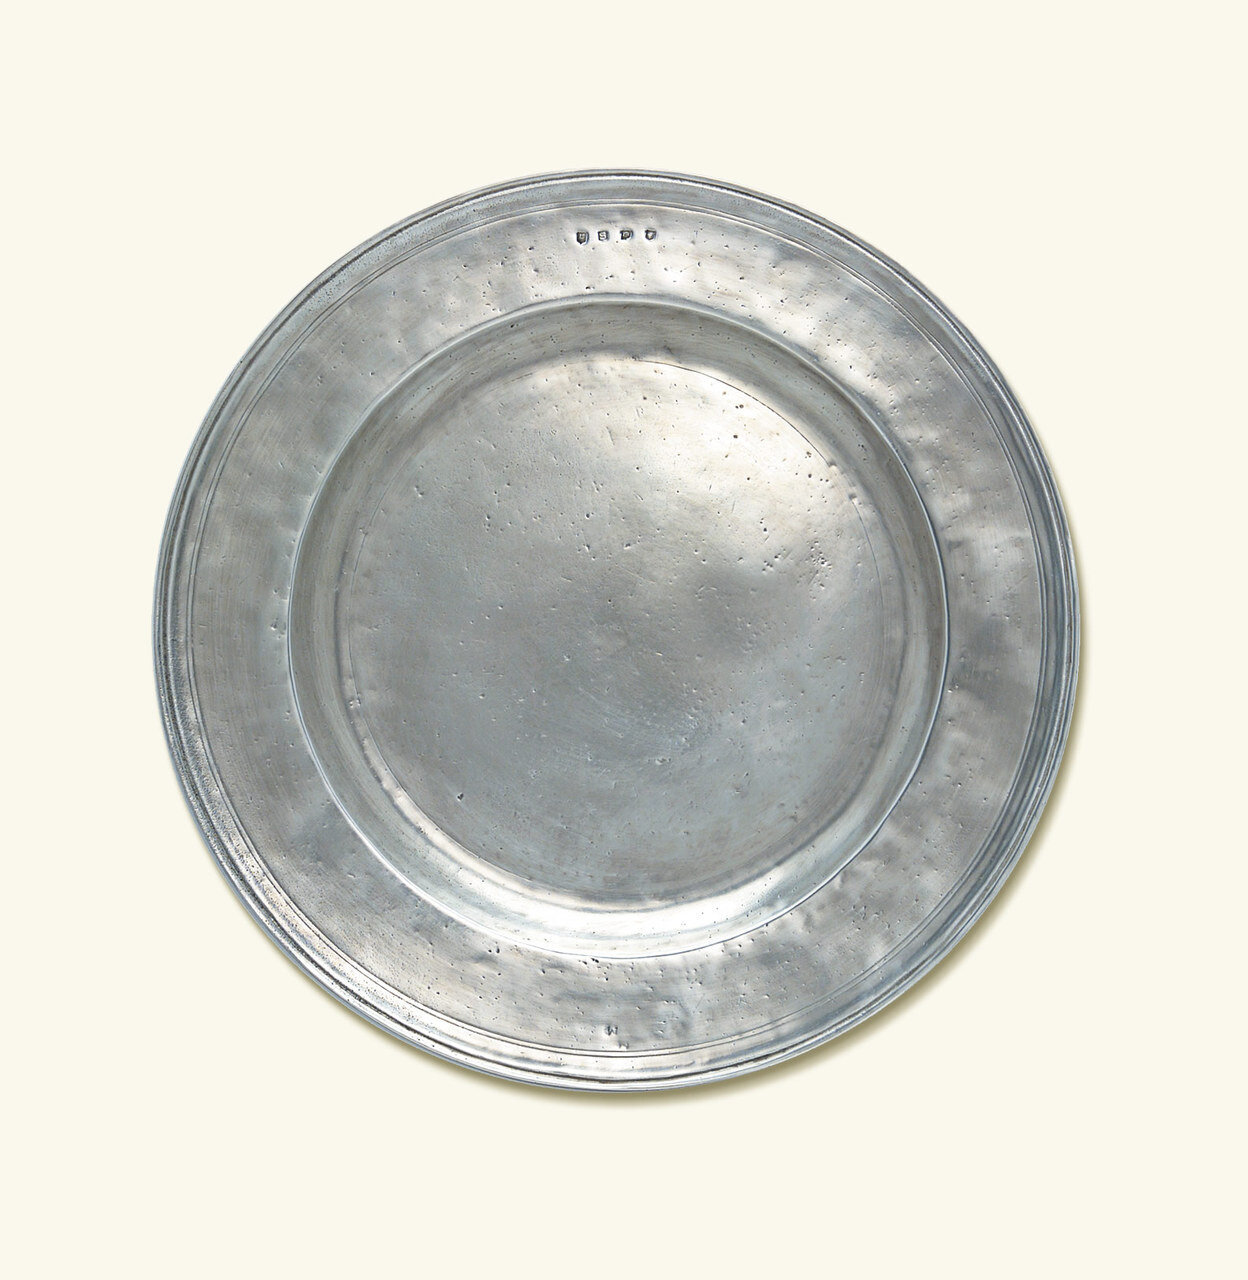 Match Pewter Round Platter Large a276.0